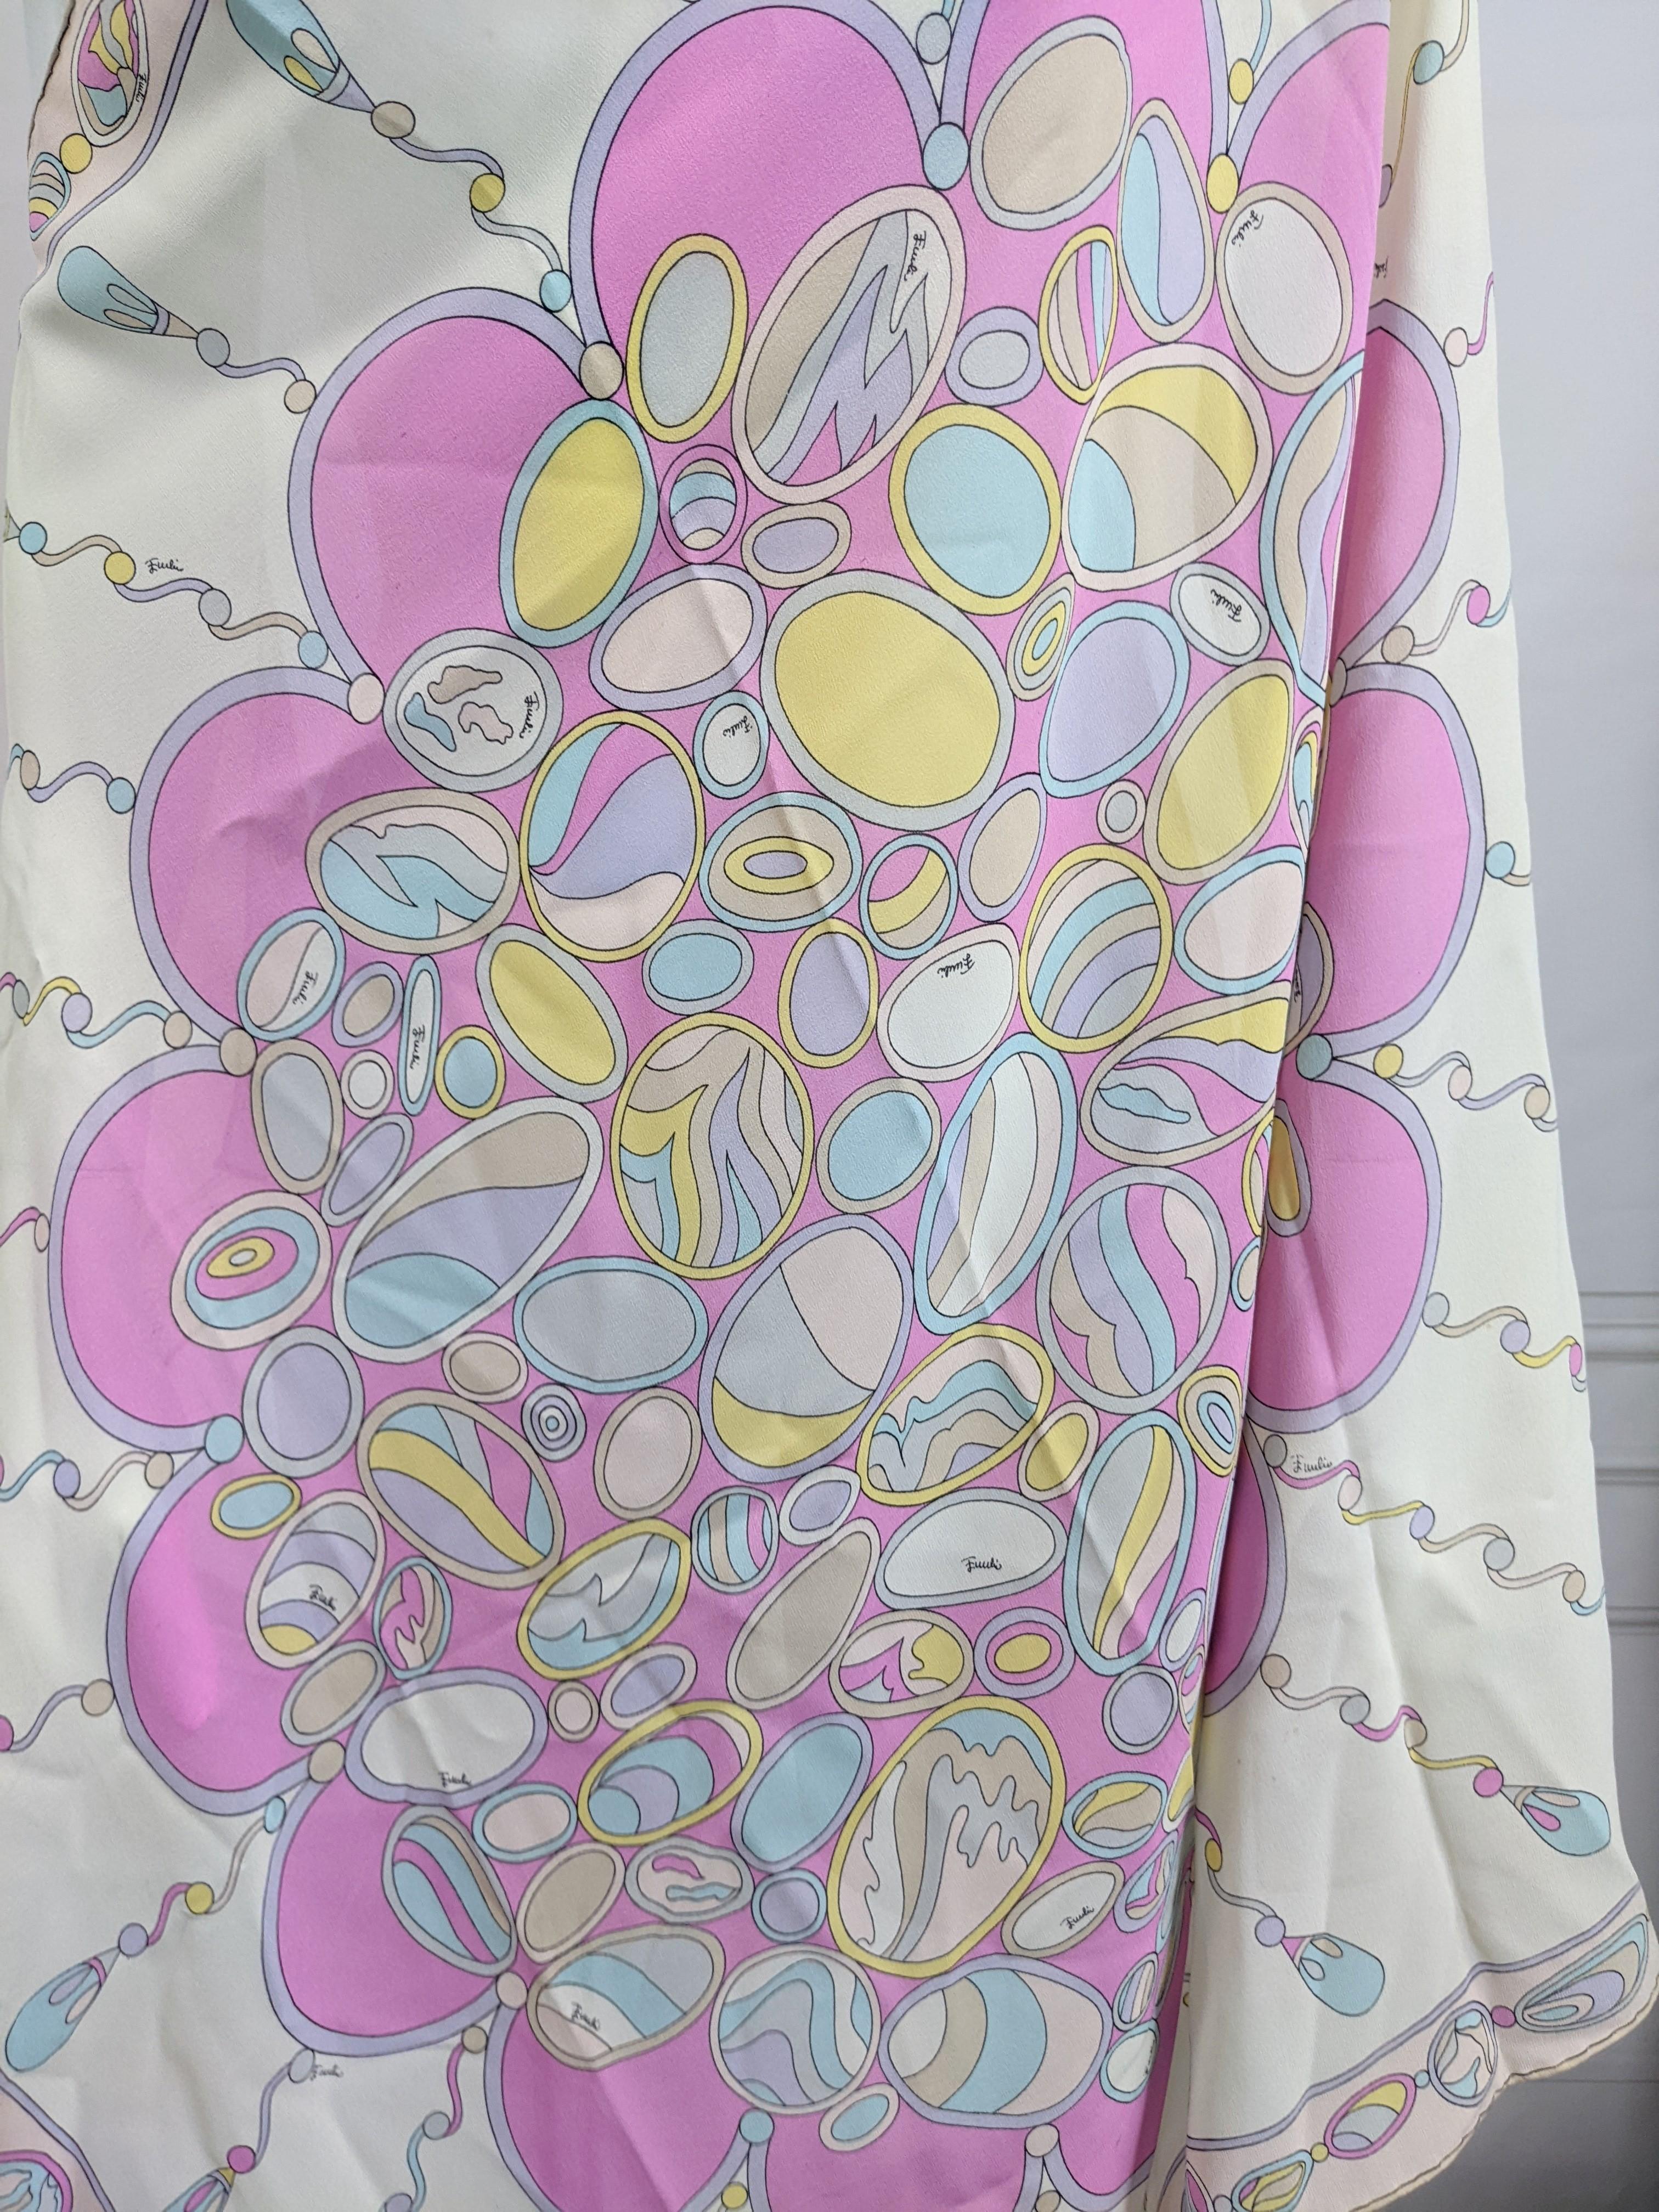 Emilio Pucci Jewel Print Chiffon Scarf In Good Condition For Sale In New York, NY